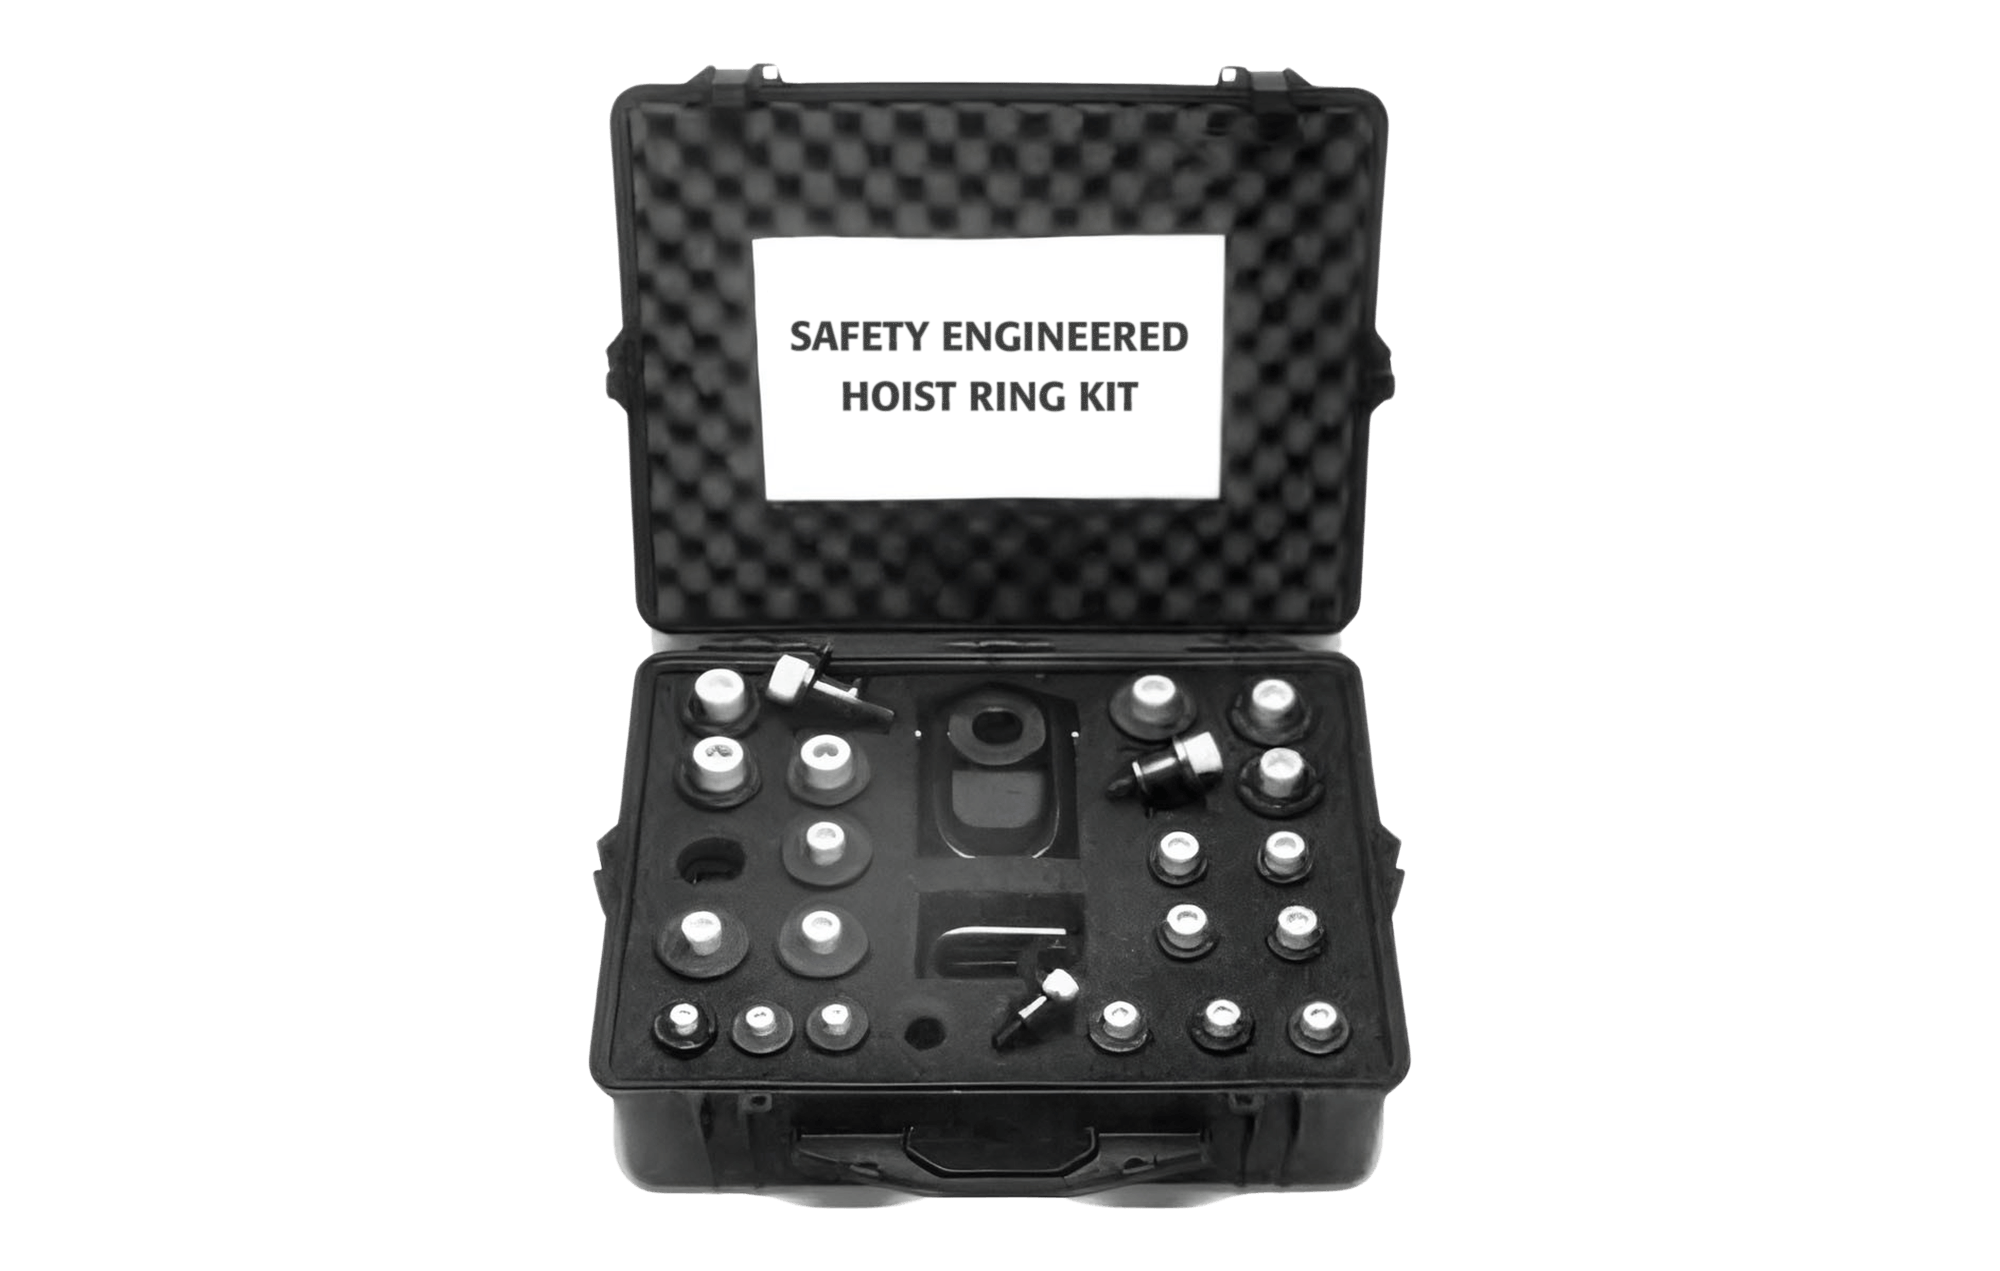 a safety engineered hoist ring kit in a case